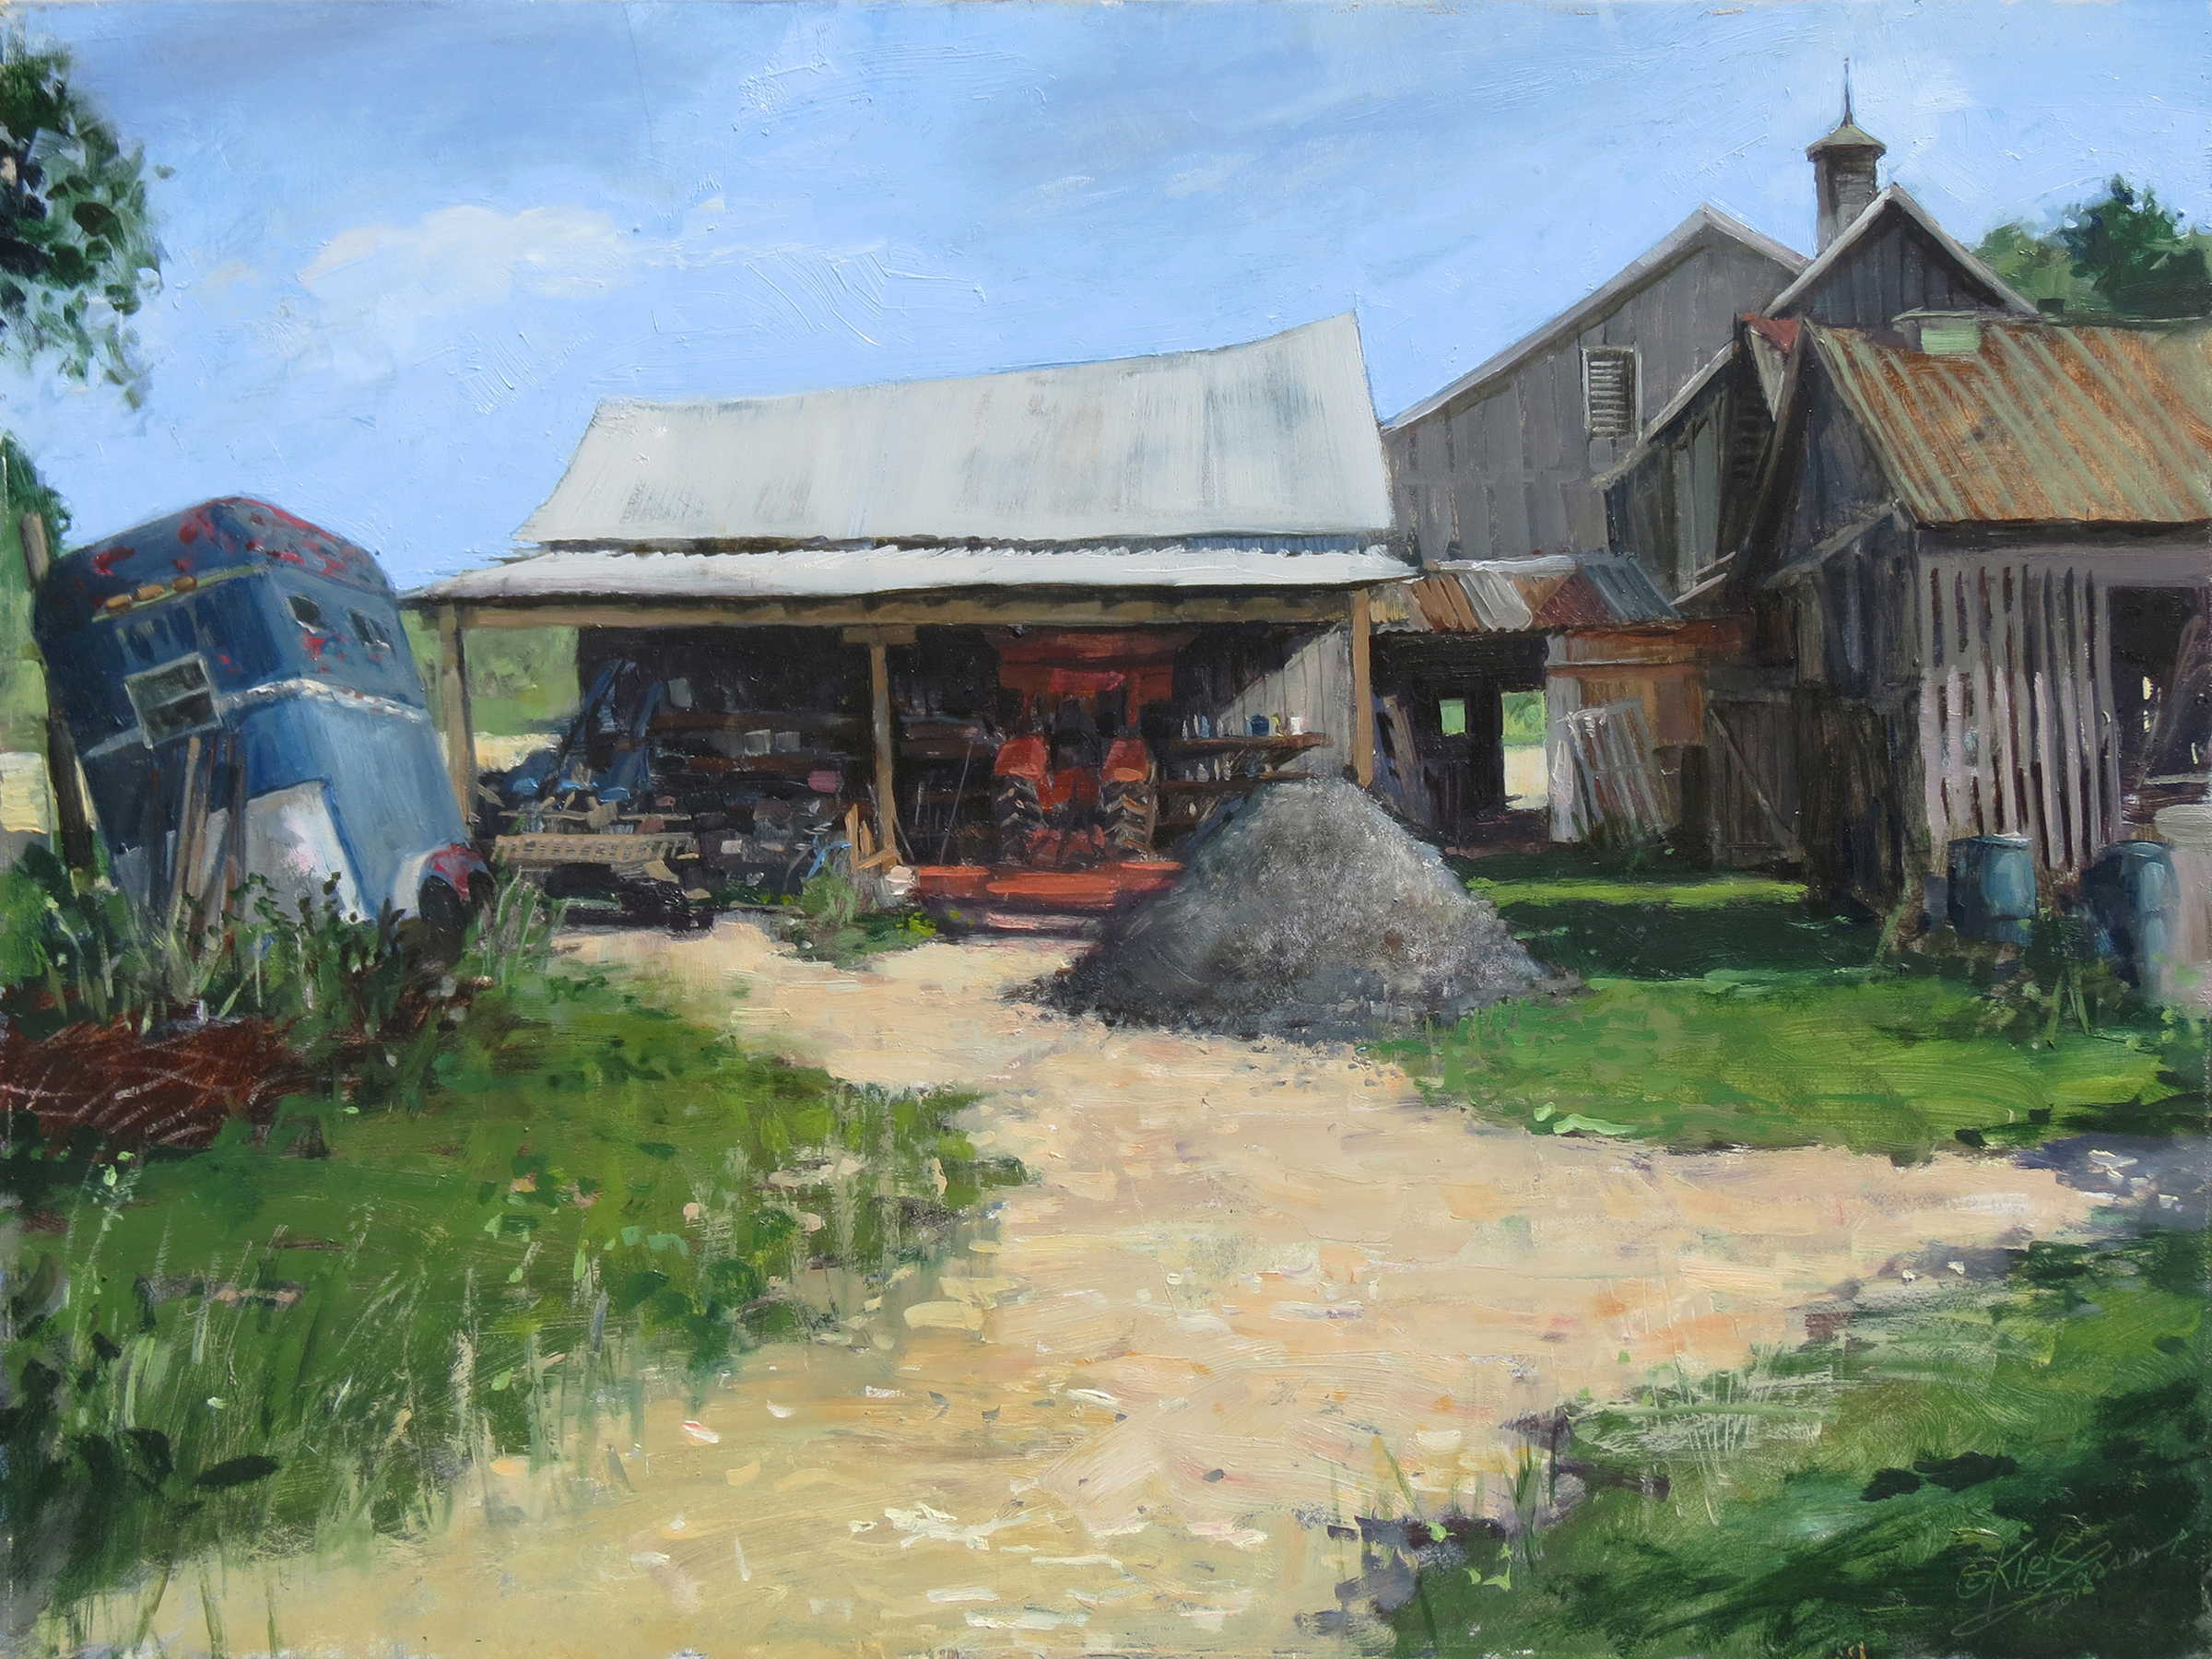 rural paintings - "The Barns Collection" by Kirk Larsen